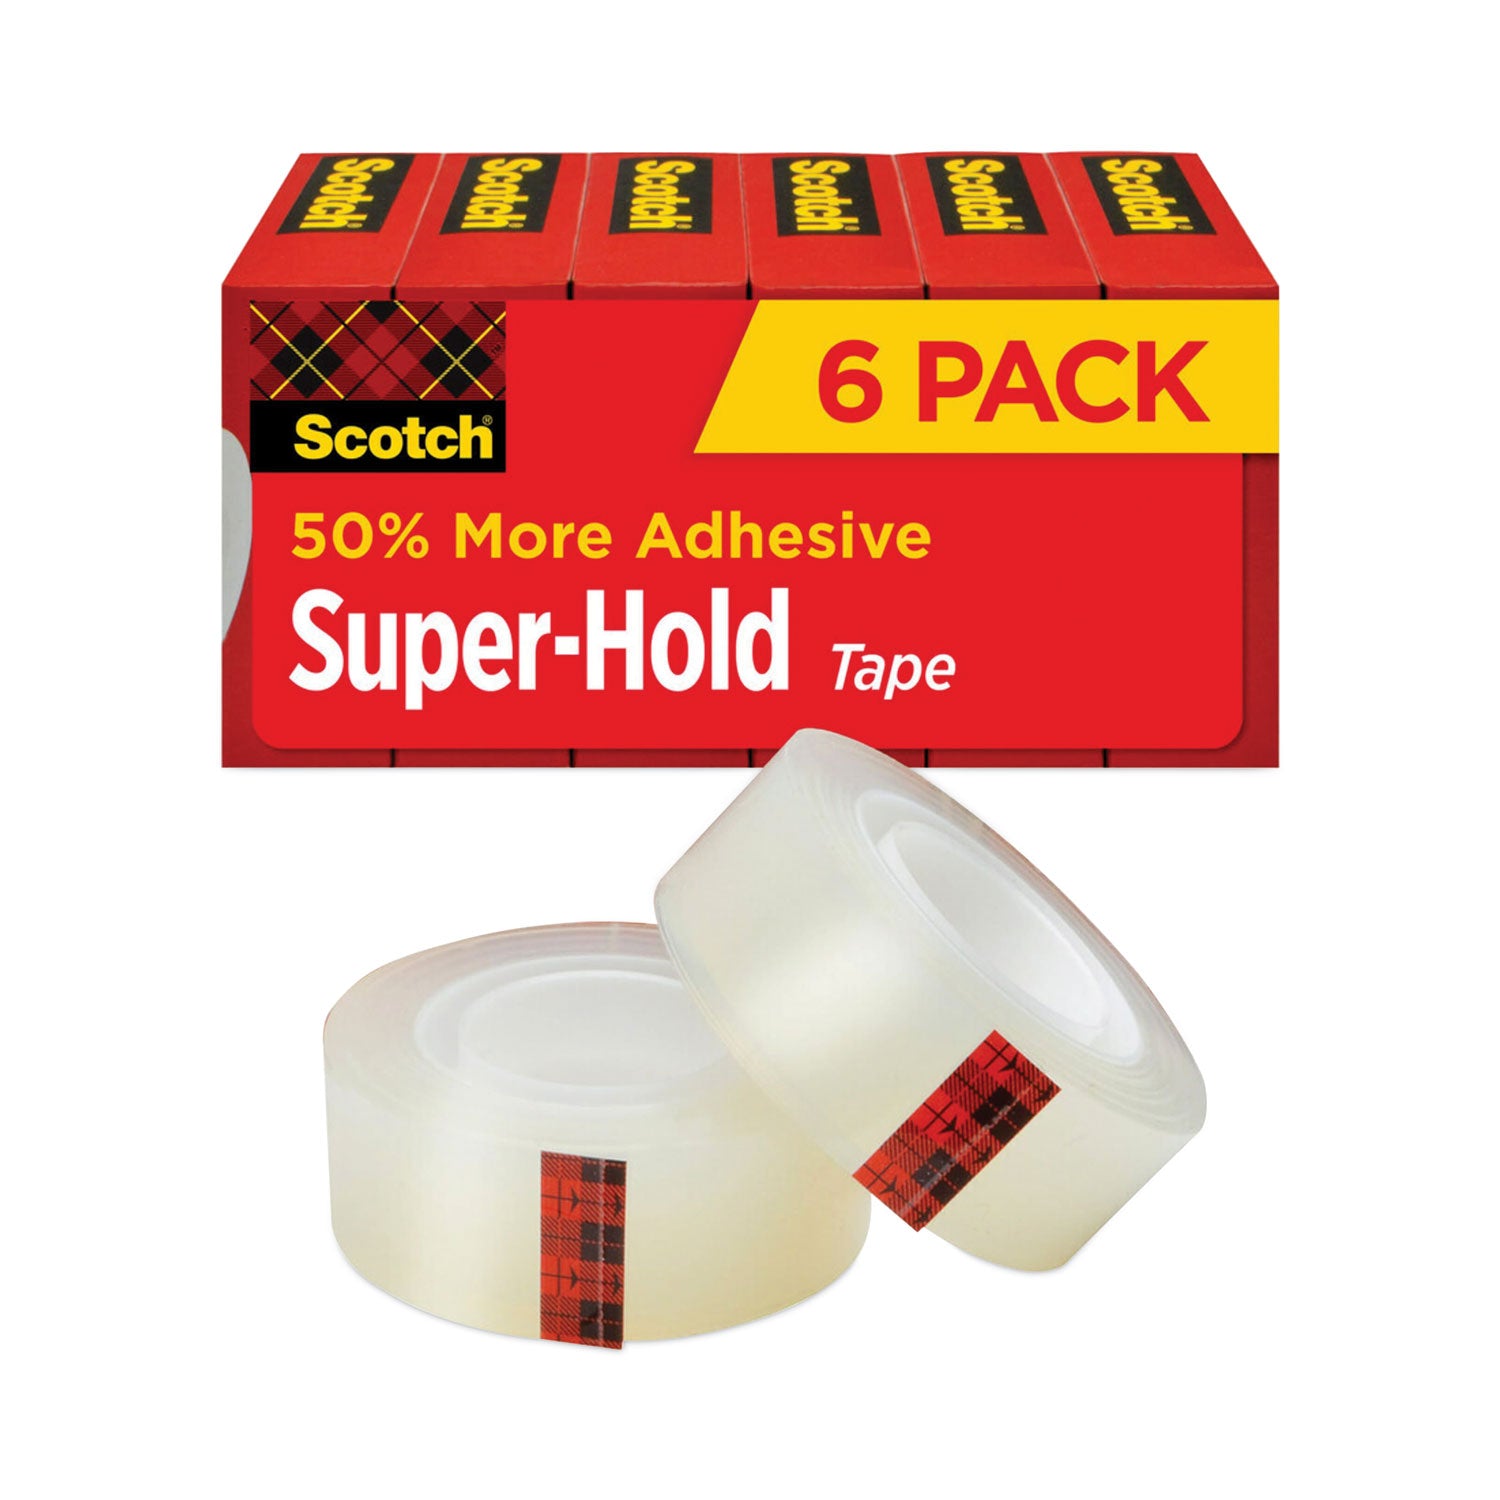 super-hold-tape-refill-1-core-075-x-2777-yds-transparent-6-pack_mmm700k6 - 1